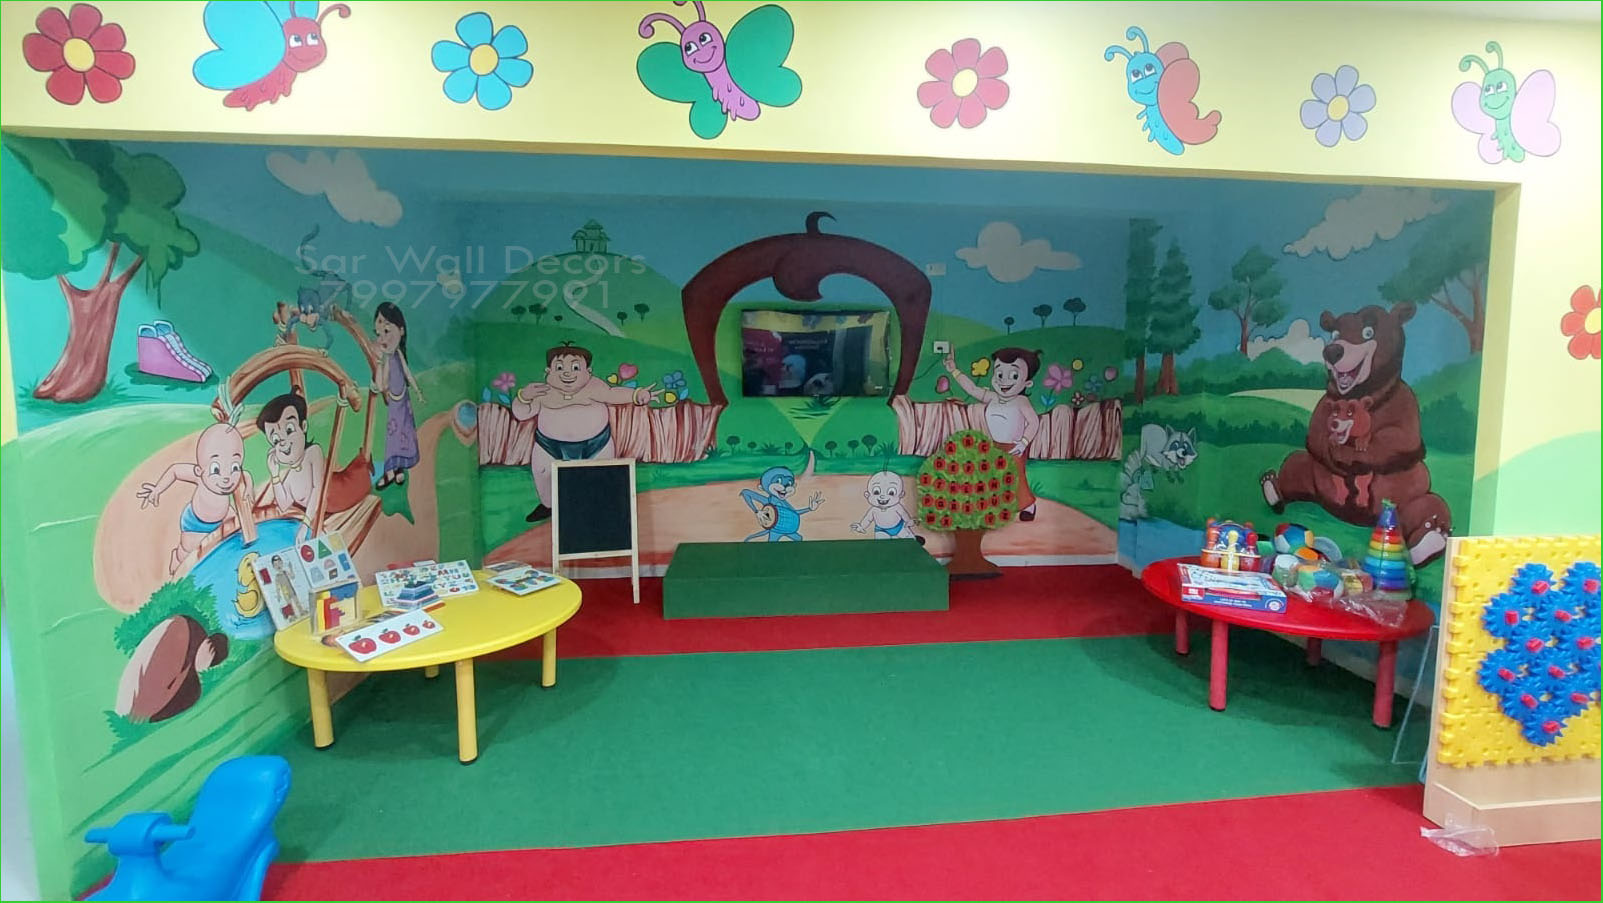 Play School Wall Painting Images From MadhapurServicesInterior Designers - ArchitectsAll Indiaother